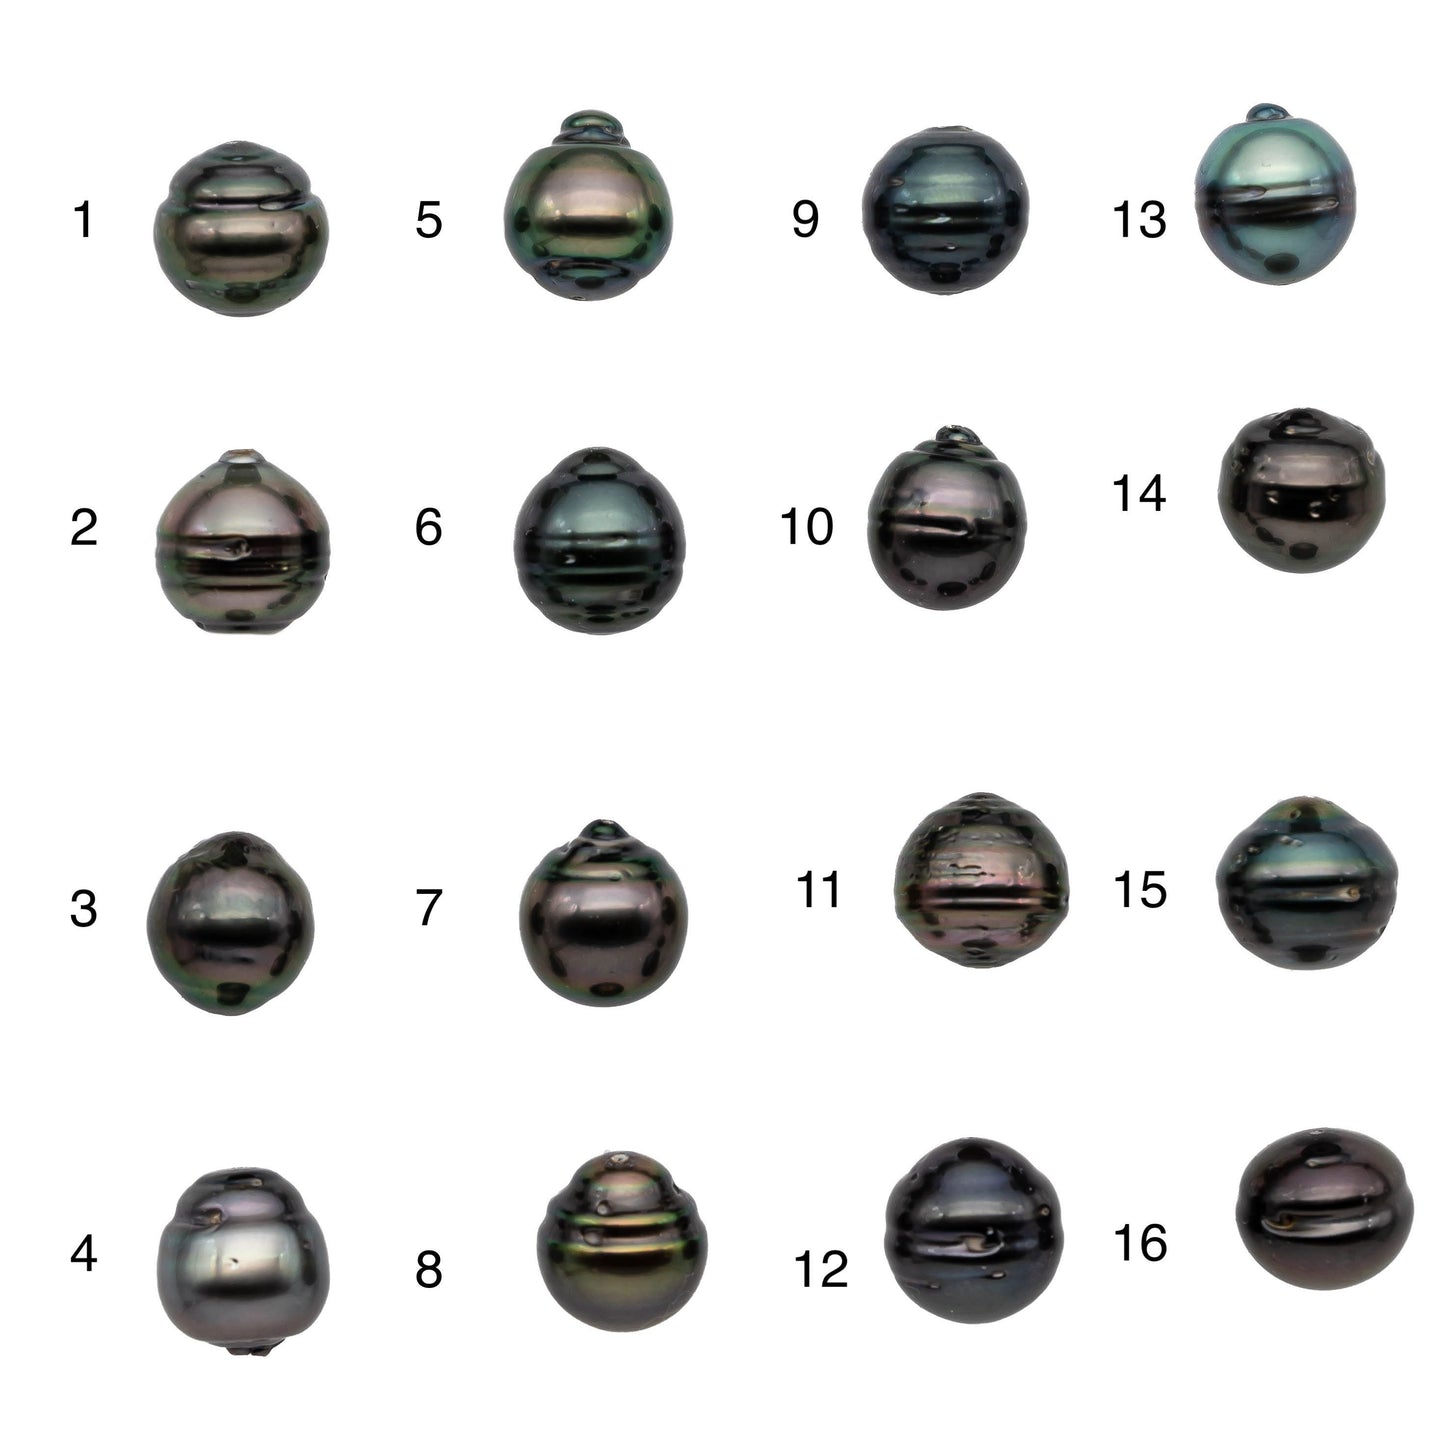 Fully Drilled Single Tahitian Pearl Near Round or Drops, Large Size Nice Luster and Natural Color for Making Jewelry, 12-13.5mm, SKU# 1144TH